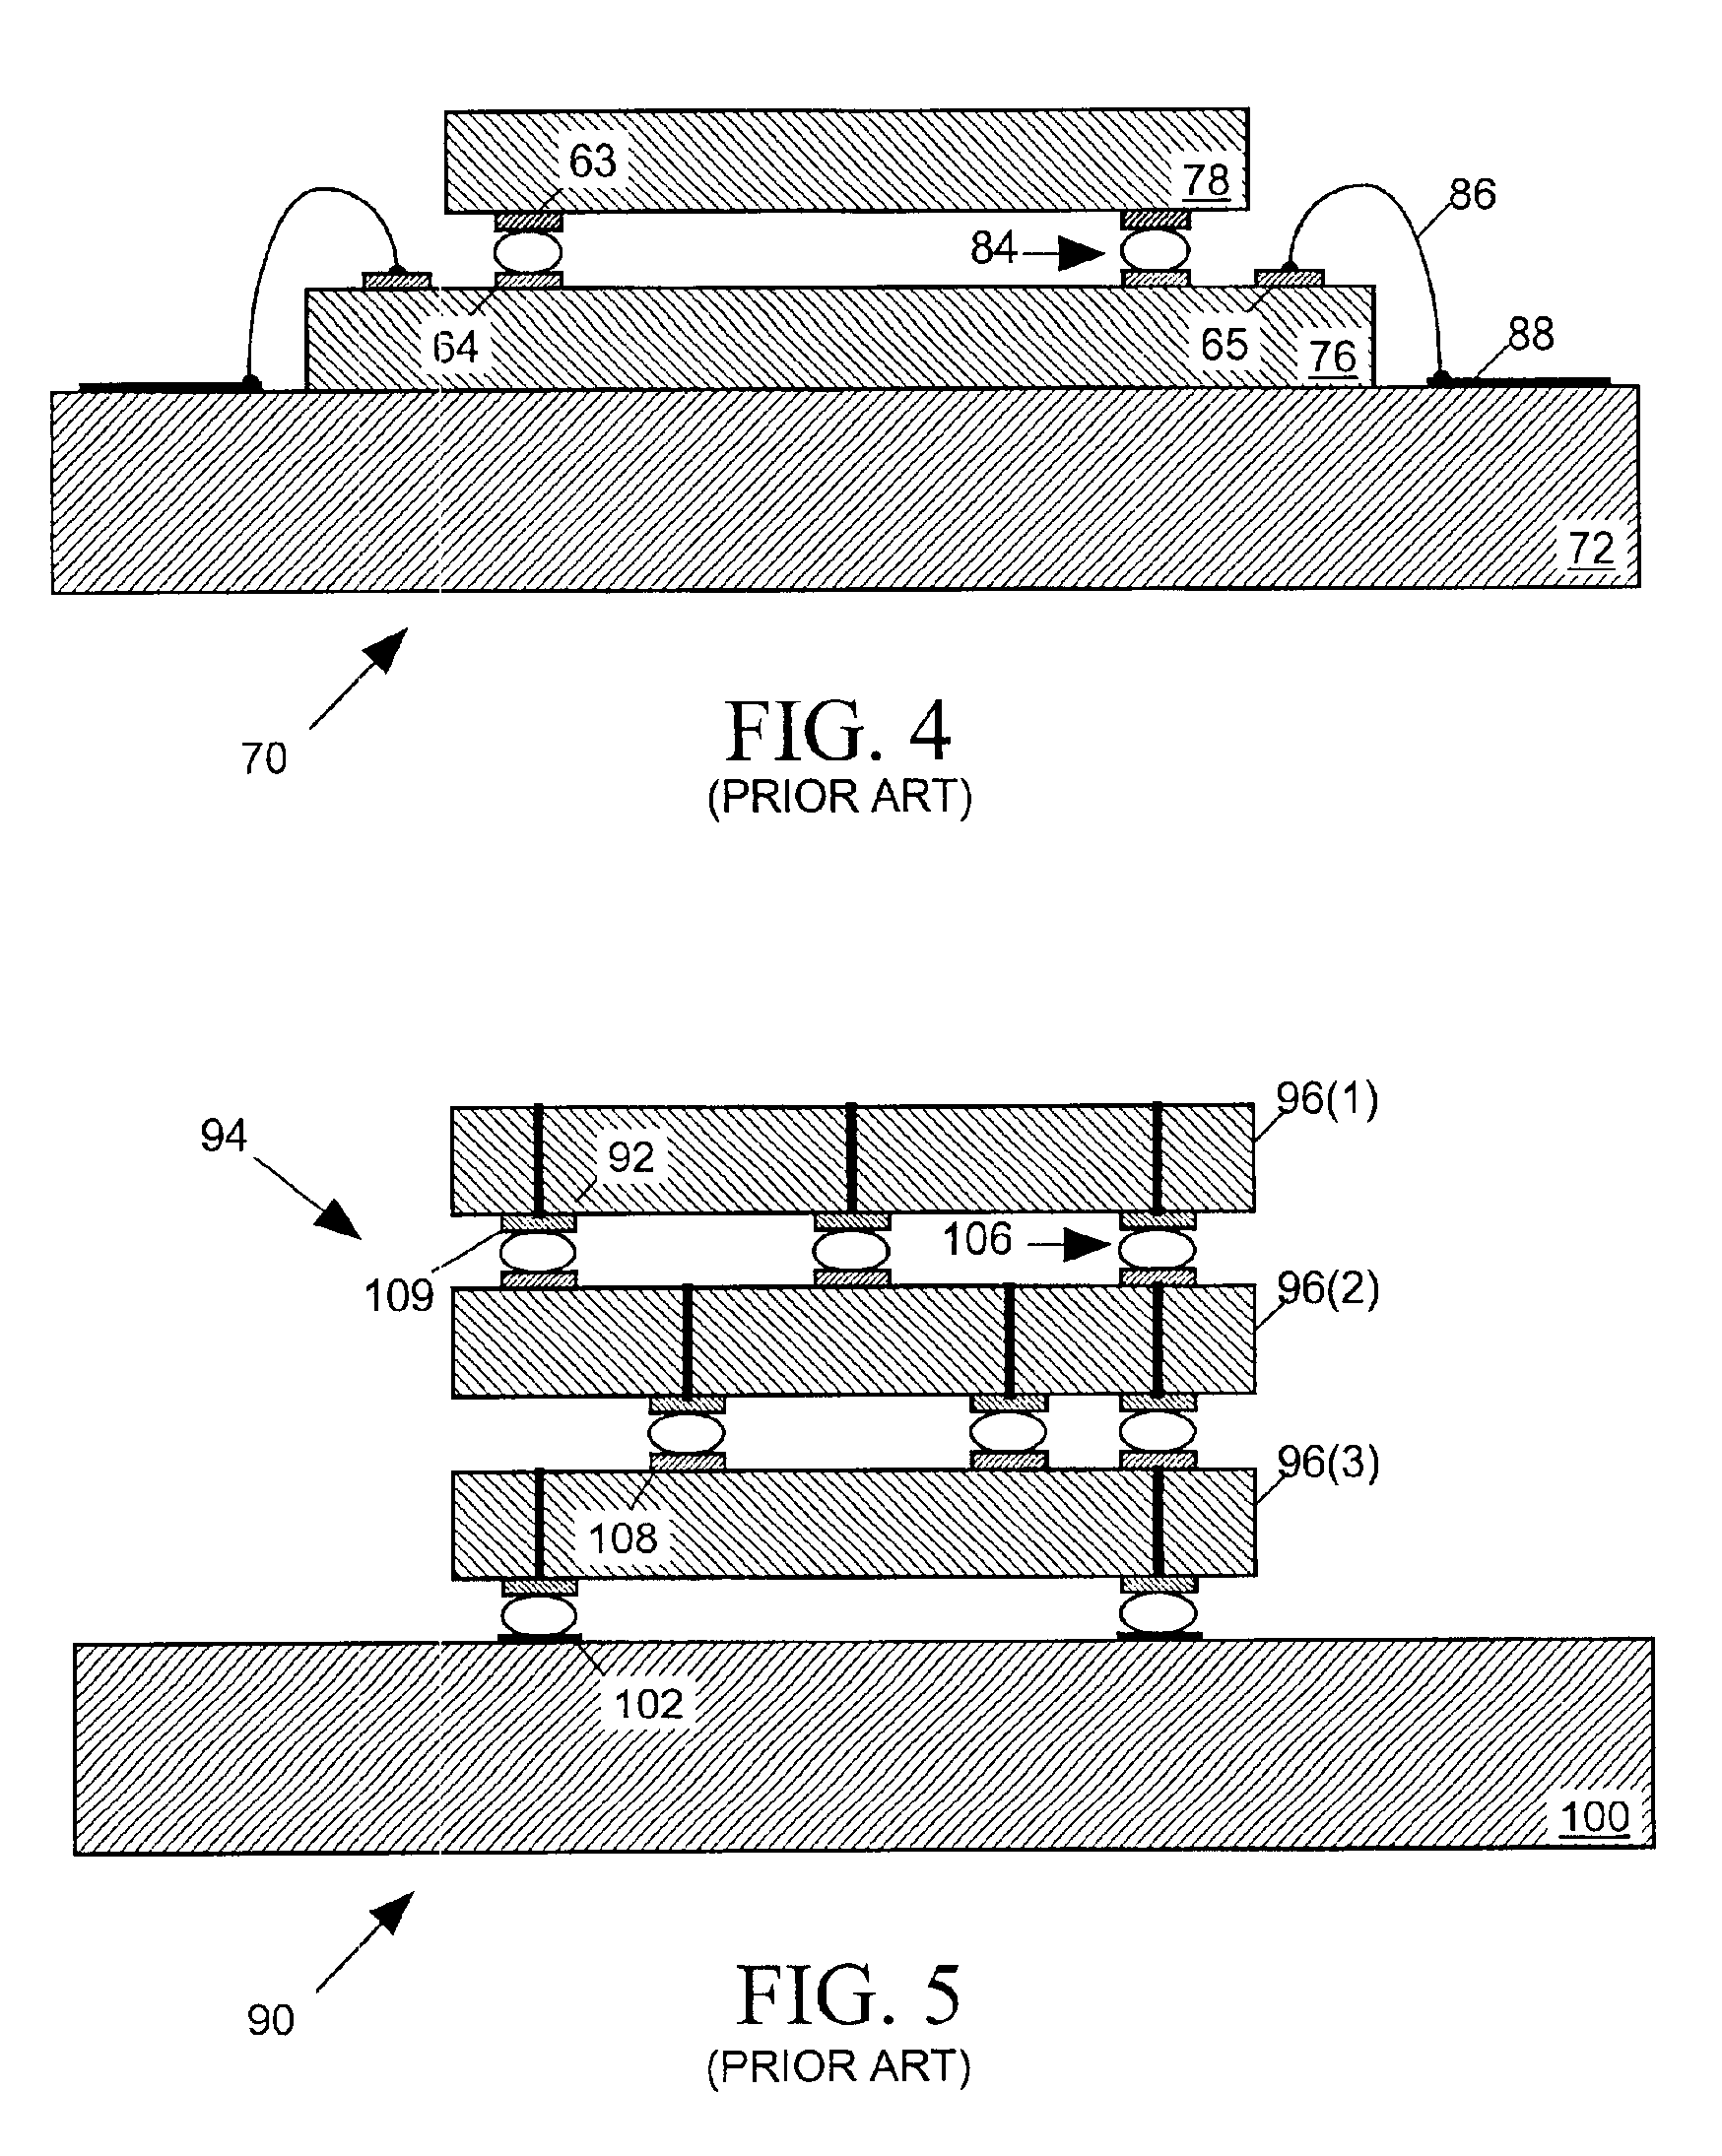 Method for fabricating an IC interconnect system including an in-street integrated circuit wafer via